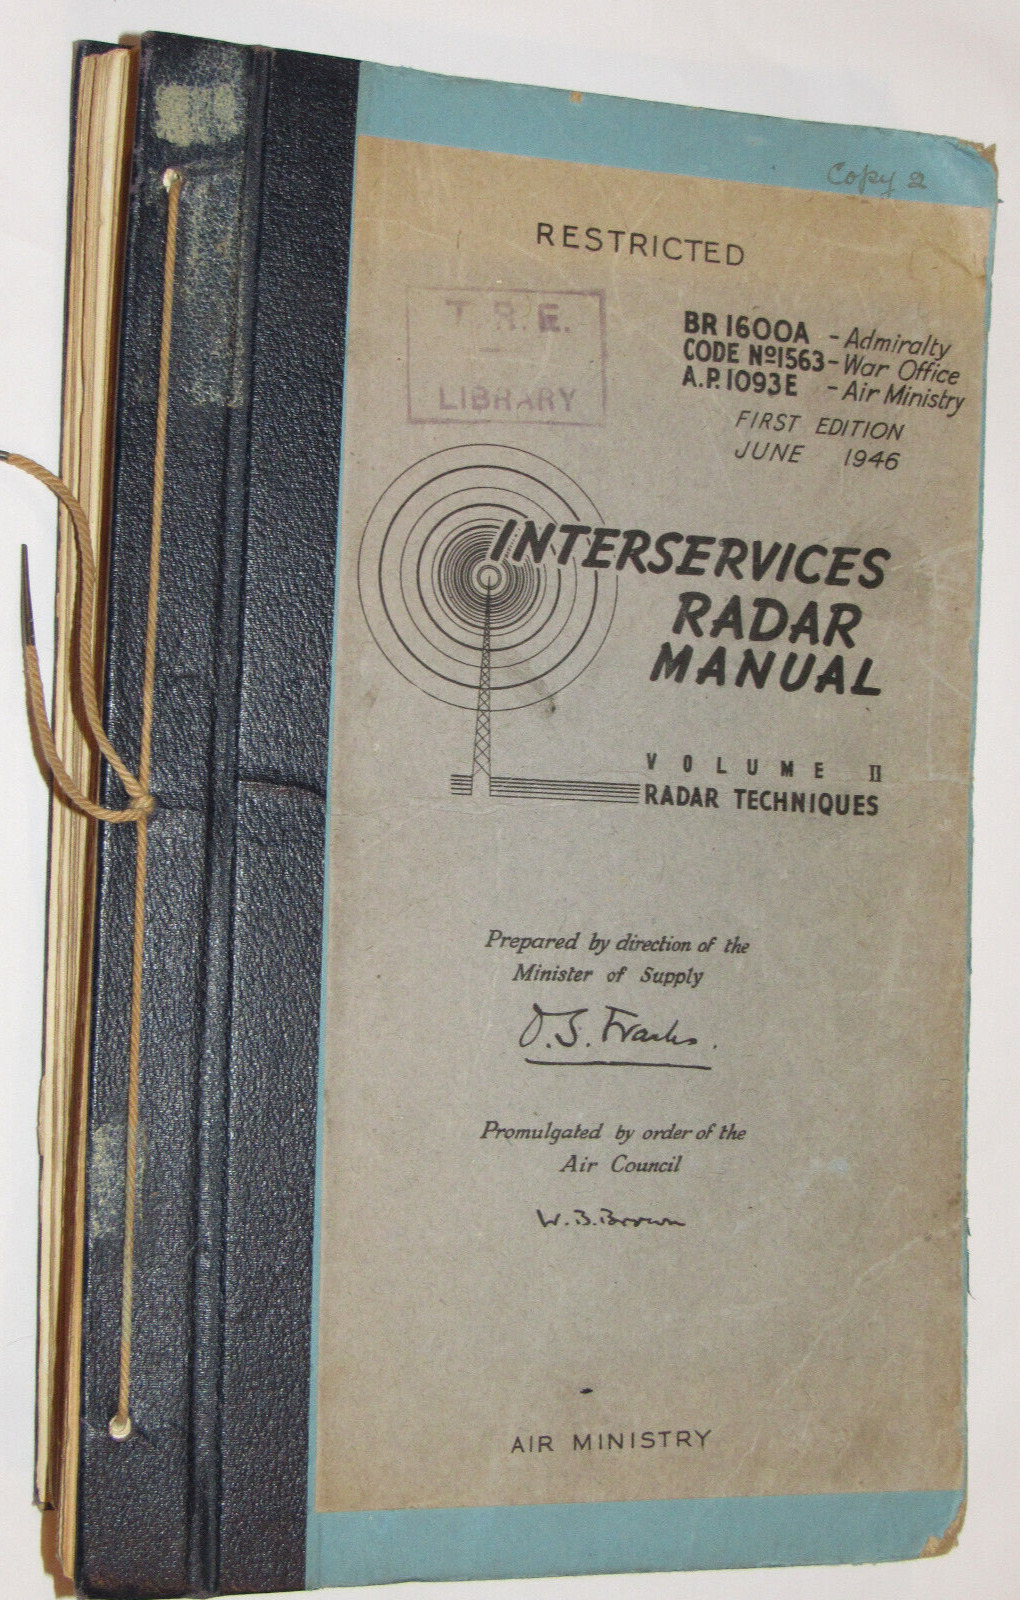 VTG 1946 RAF AIR MINISTRY BOOK INTERSERVICES RADAR TECHNIQUES MANUAL/RESTRICTED